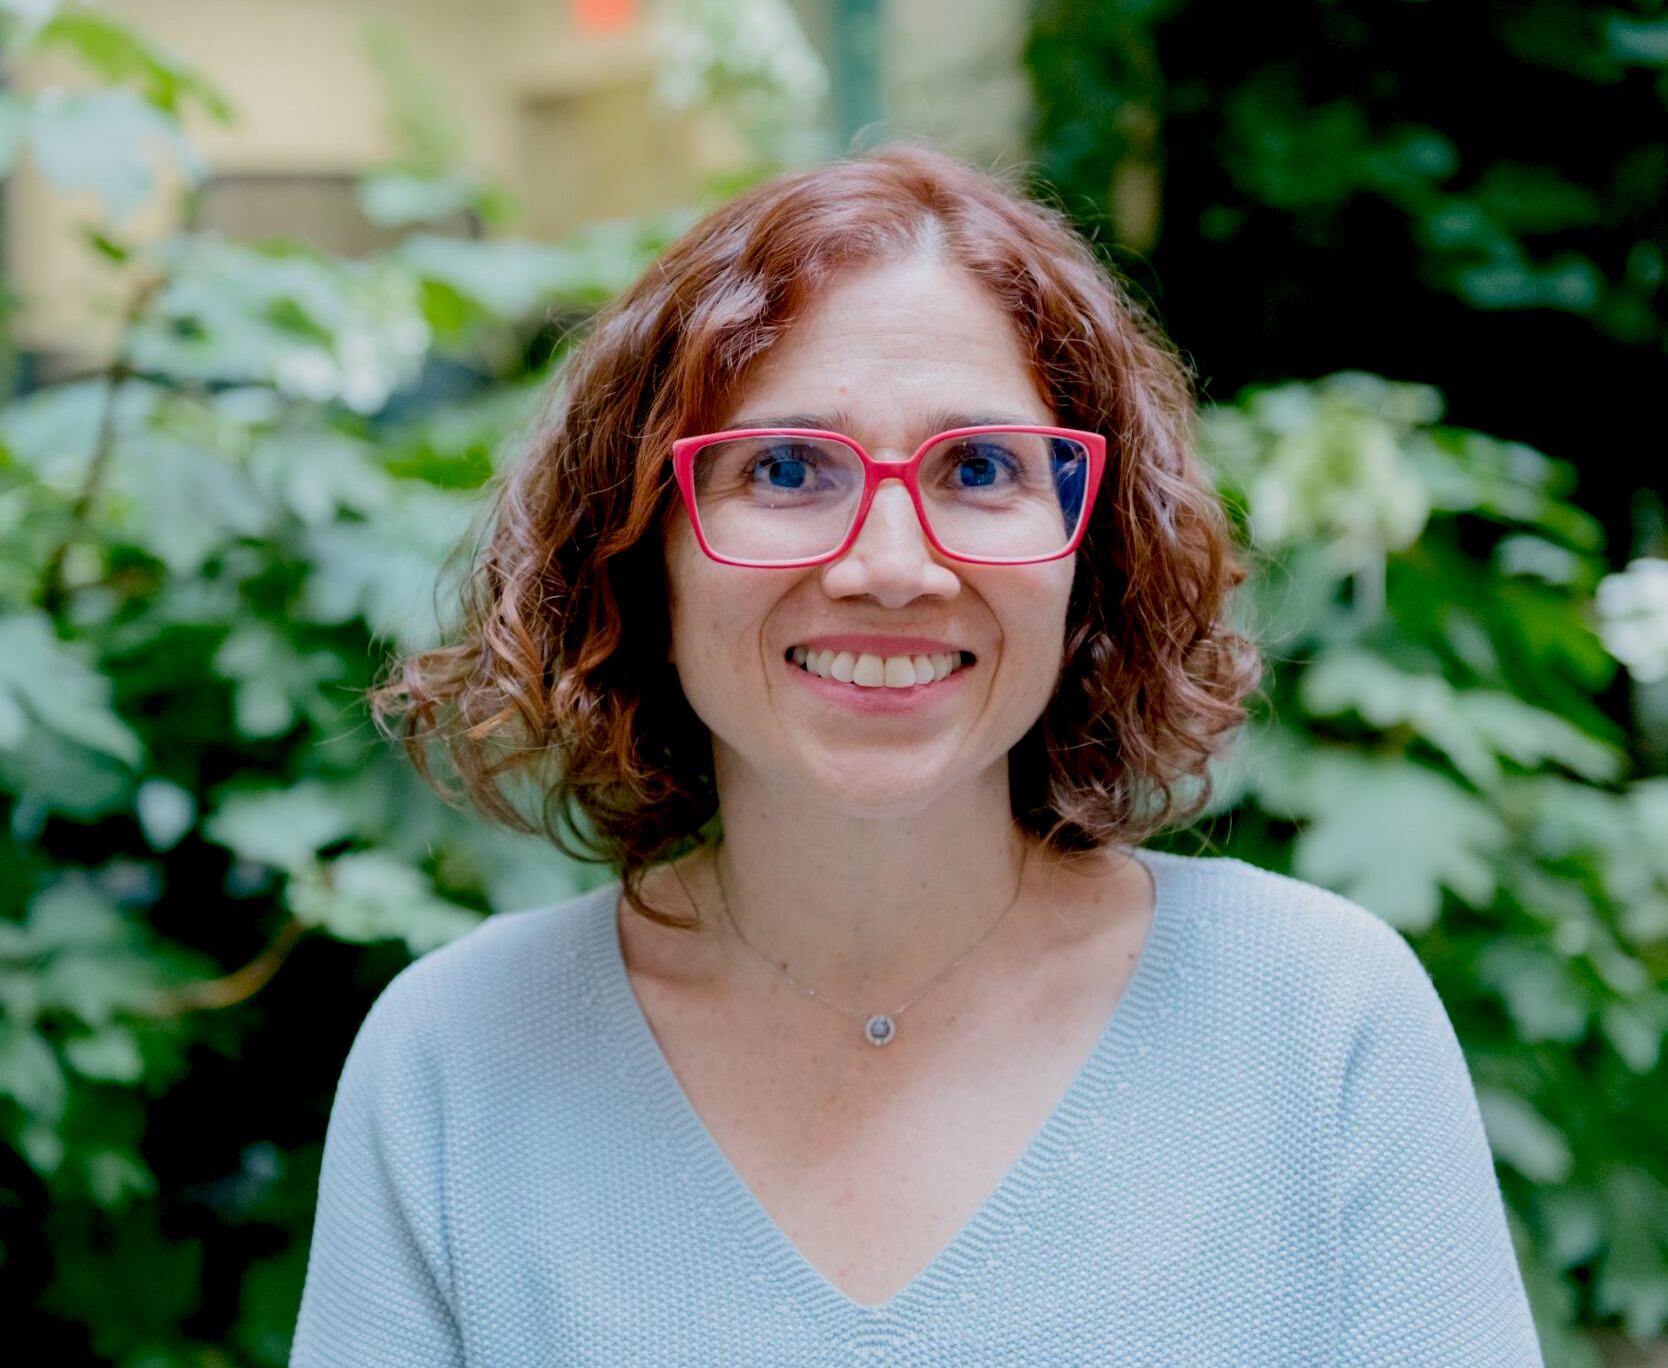 A portrait image of Catalina who is wearing red glasses and smiling.